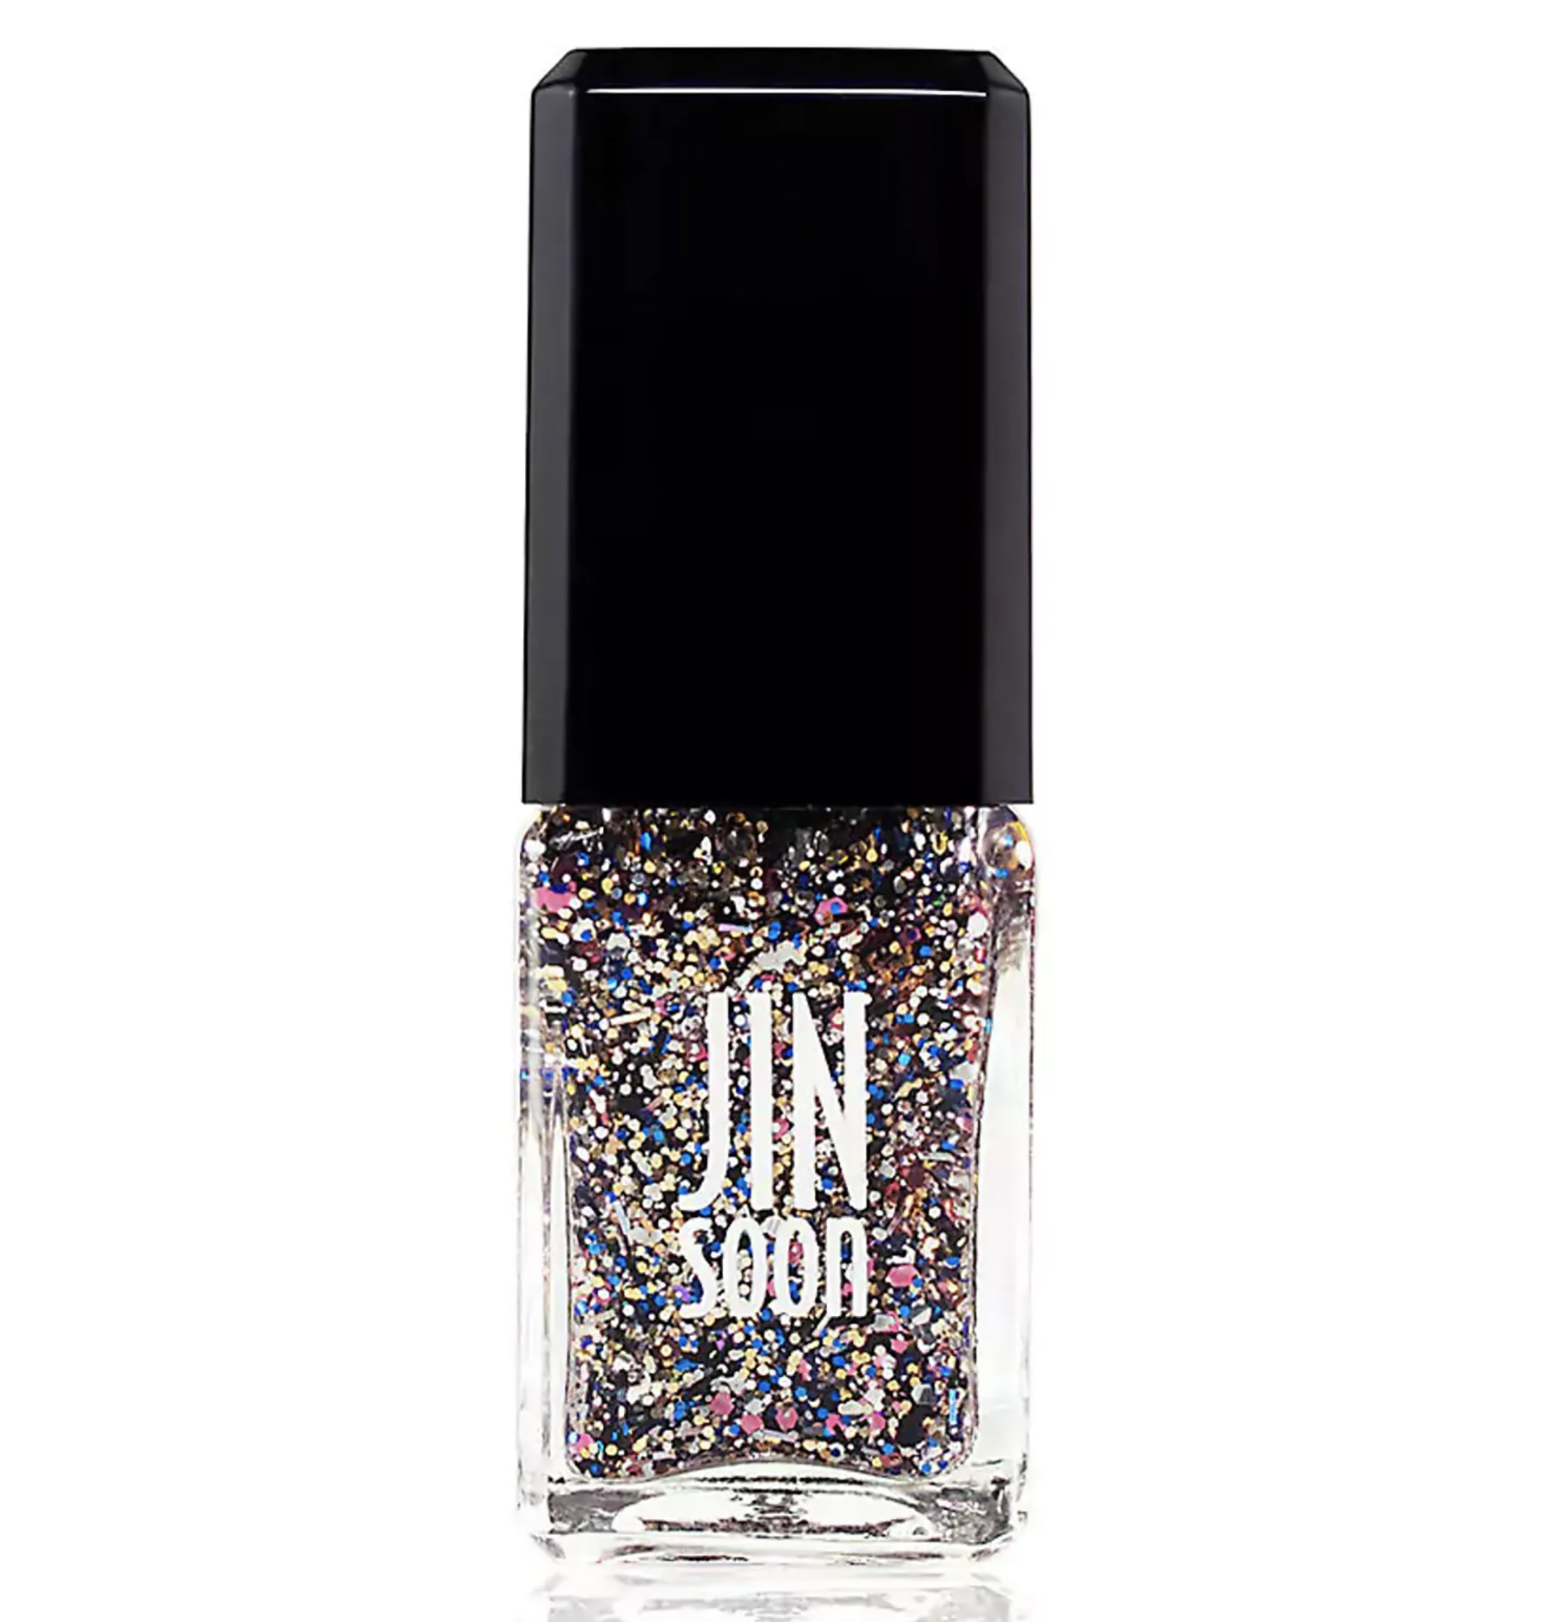 5 Best Nail Polish Brands that are long-lasting - Now That's Thrifty!